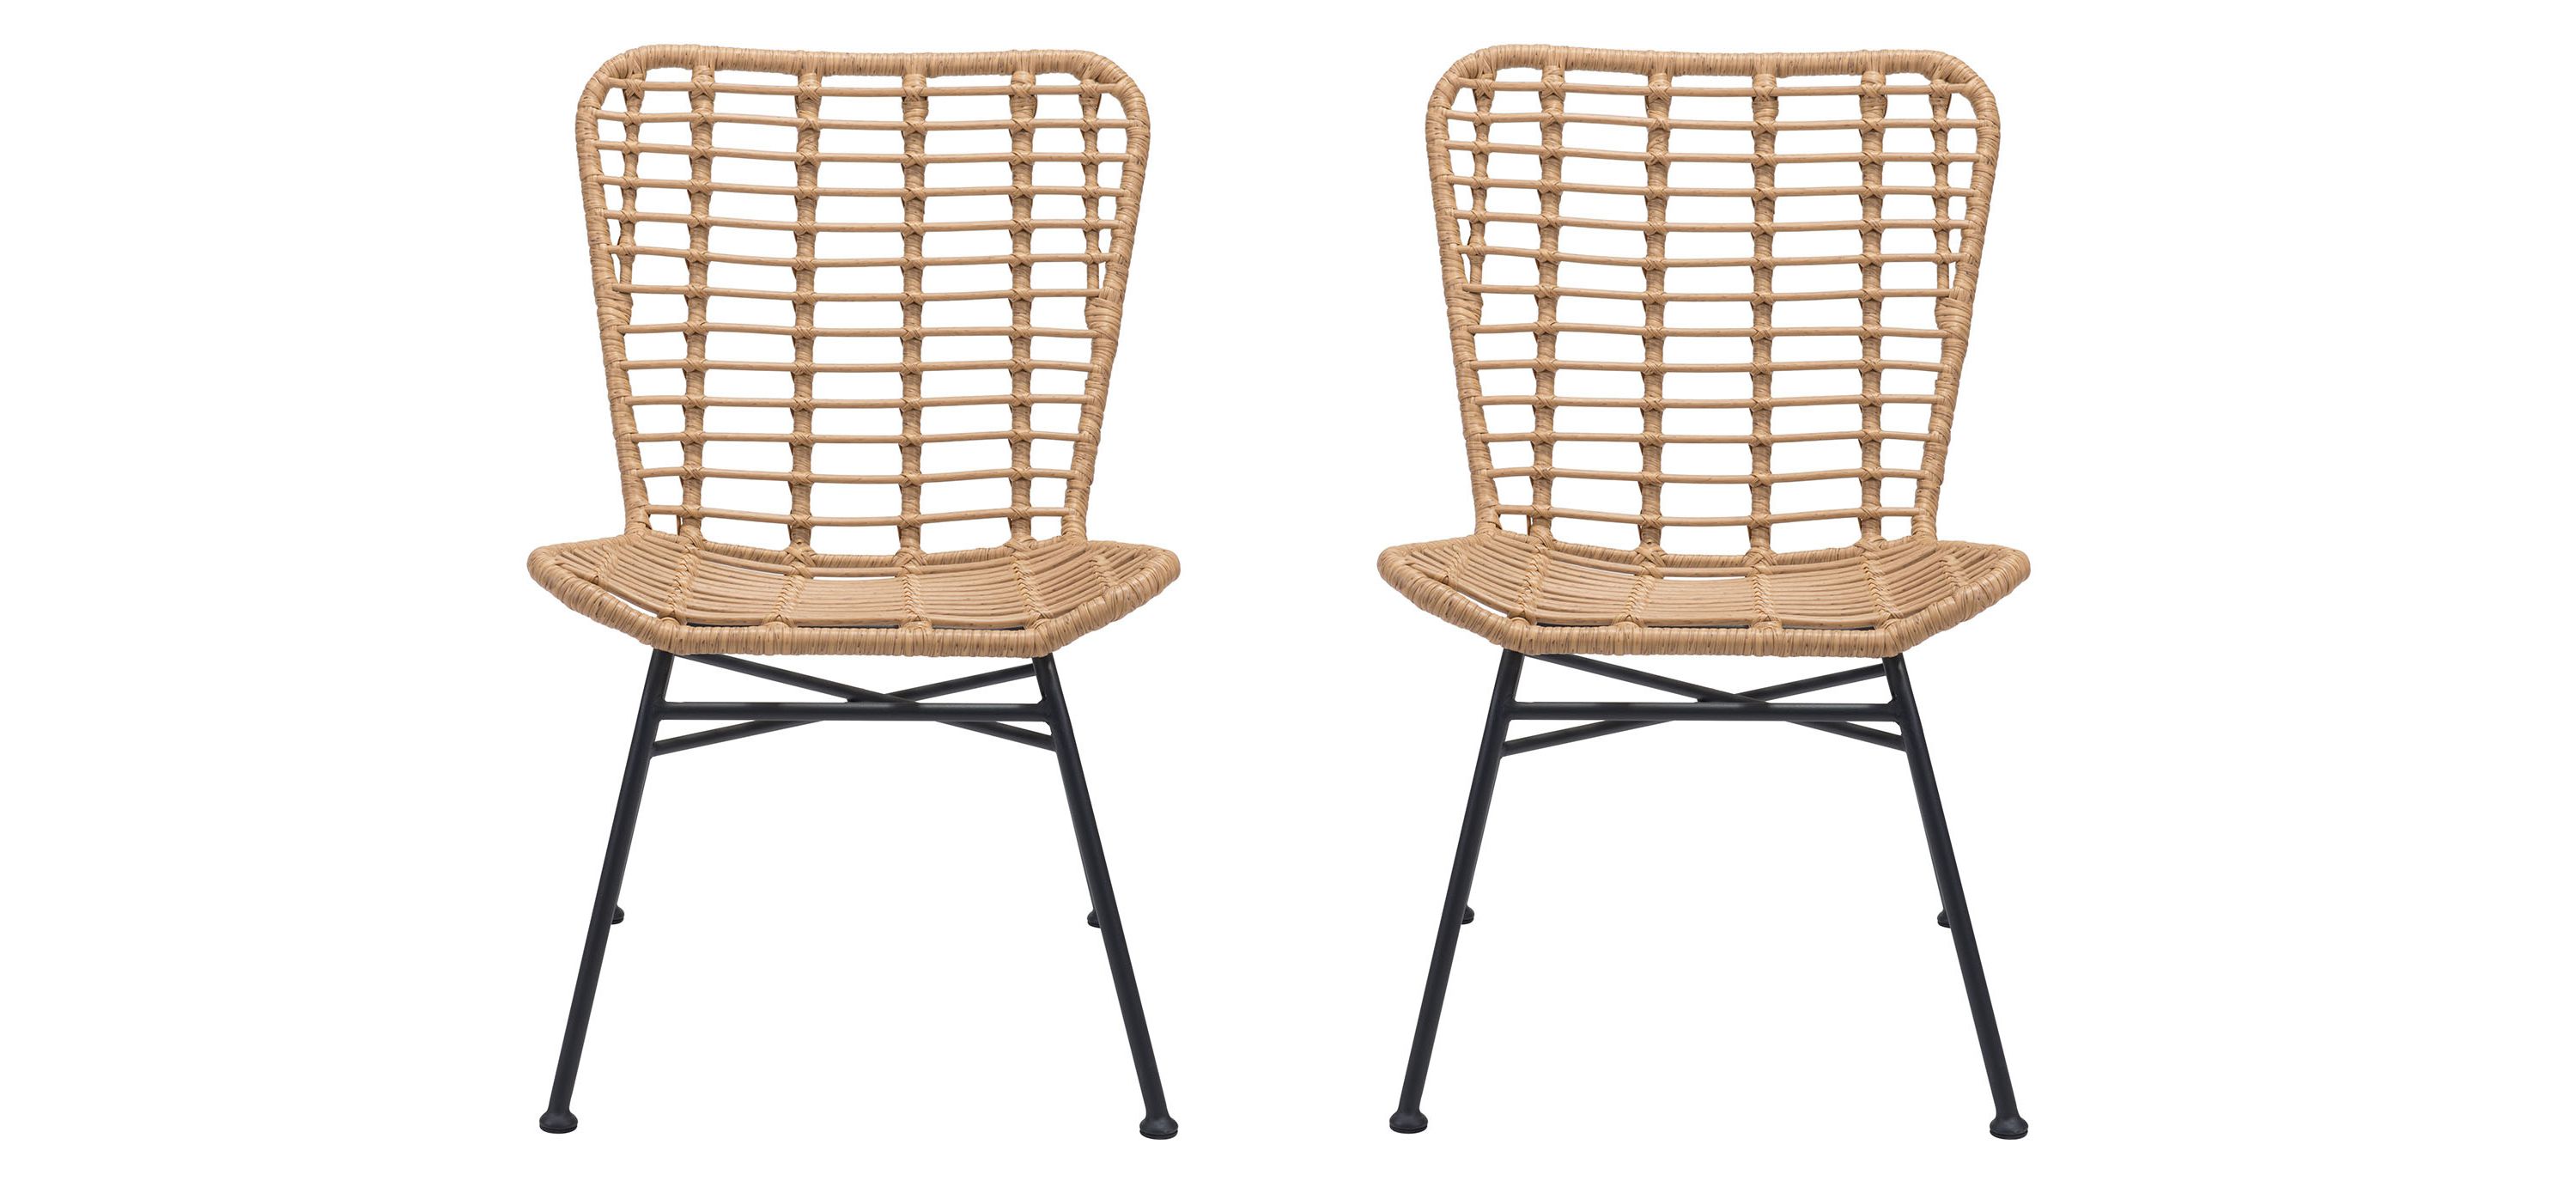 Loreve Outdoor Dining Chair - Set of 2